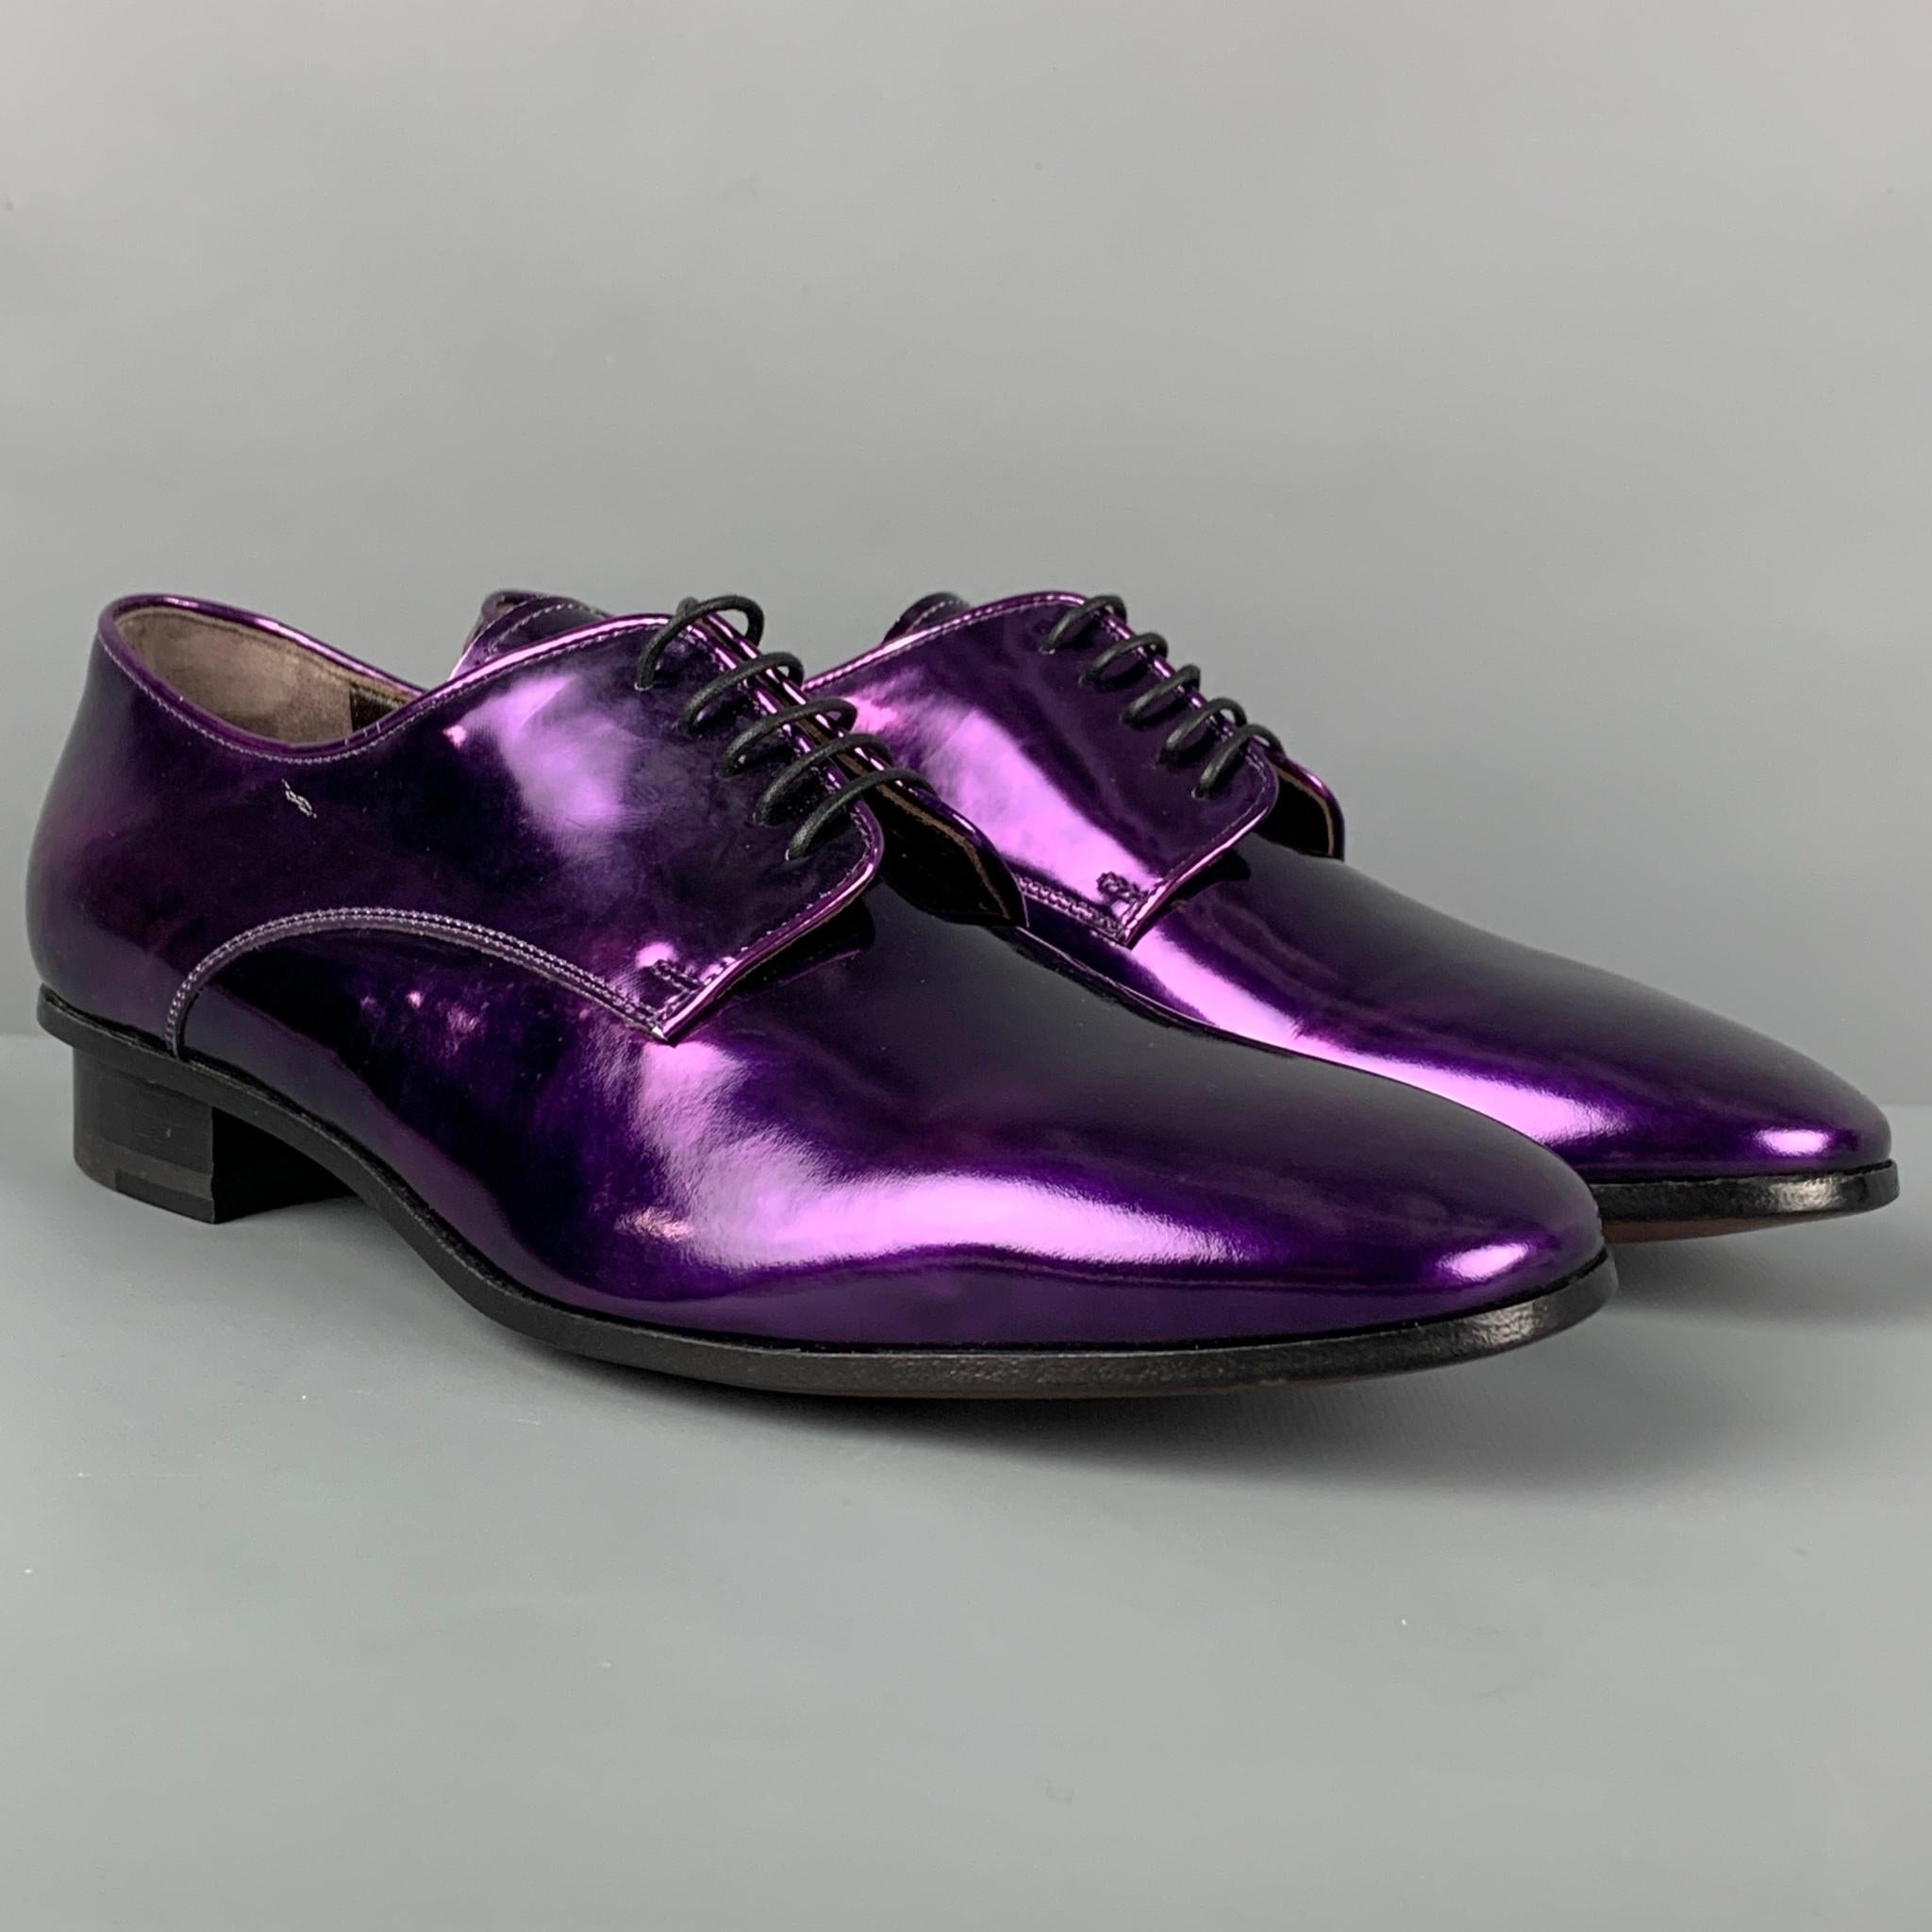 LANVIN shoes comes in a purple metallic leather featuring a classic style and a lace up closure. Comes with box. Made in Italy. 

Excellent Pre-Owned Condition.
Marked: 7.5
Original Retail Price: $865.00

Outsole: 11.25 in. x 4 in. 